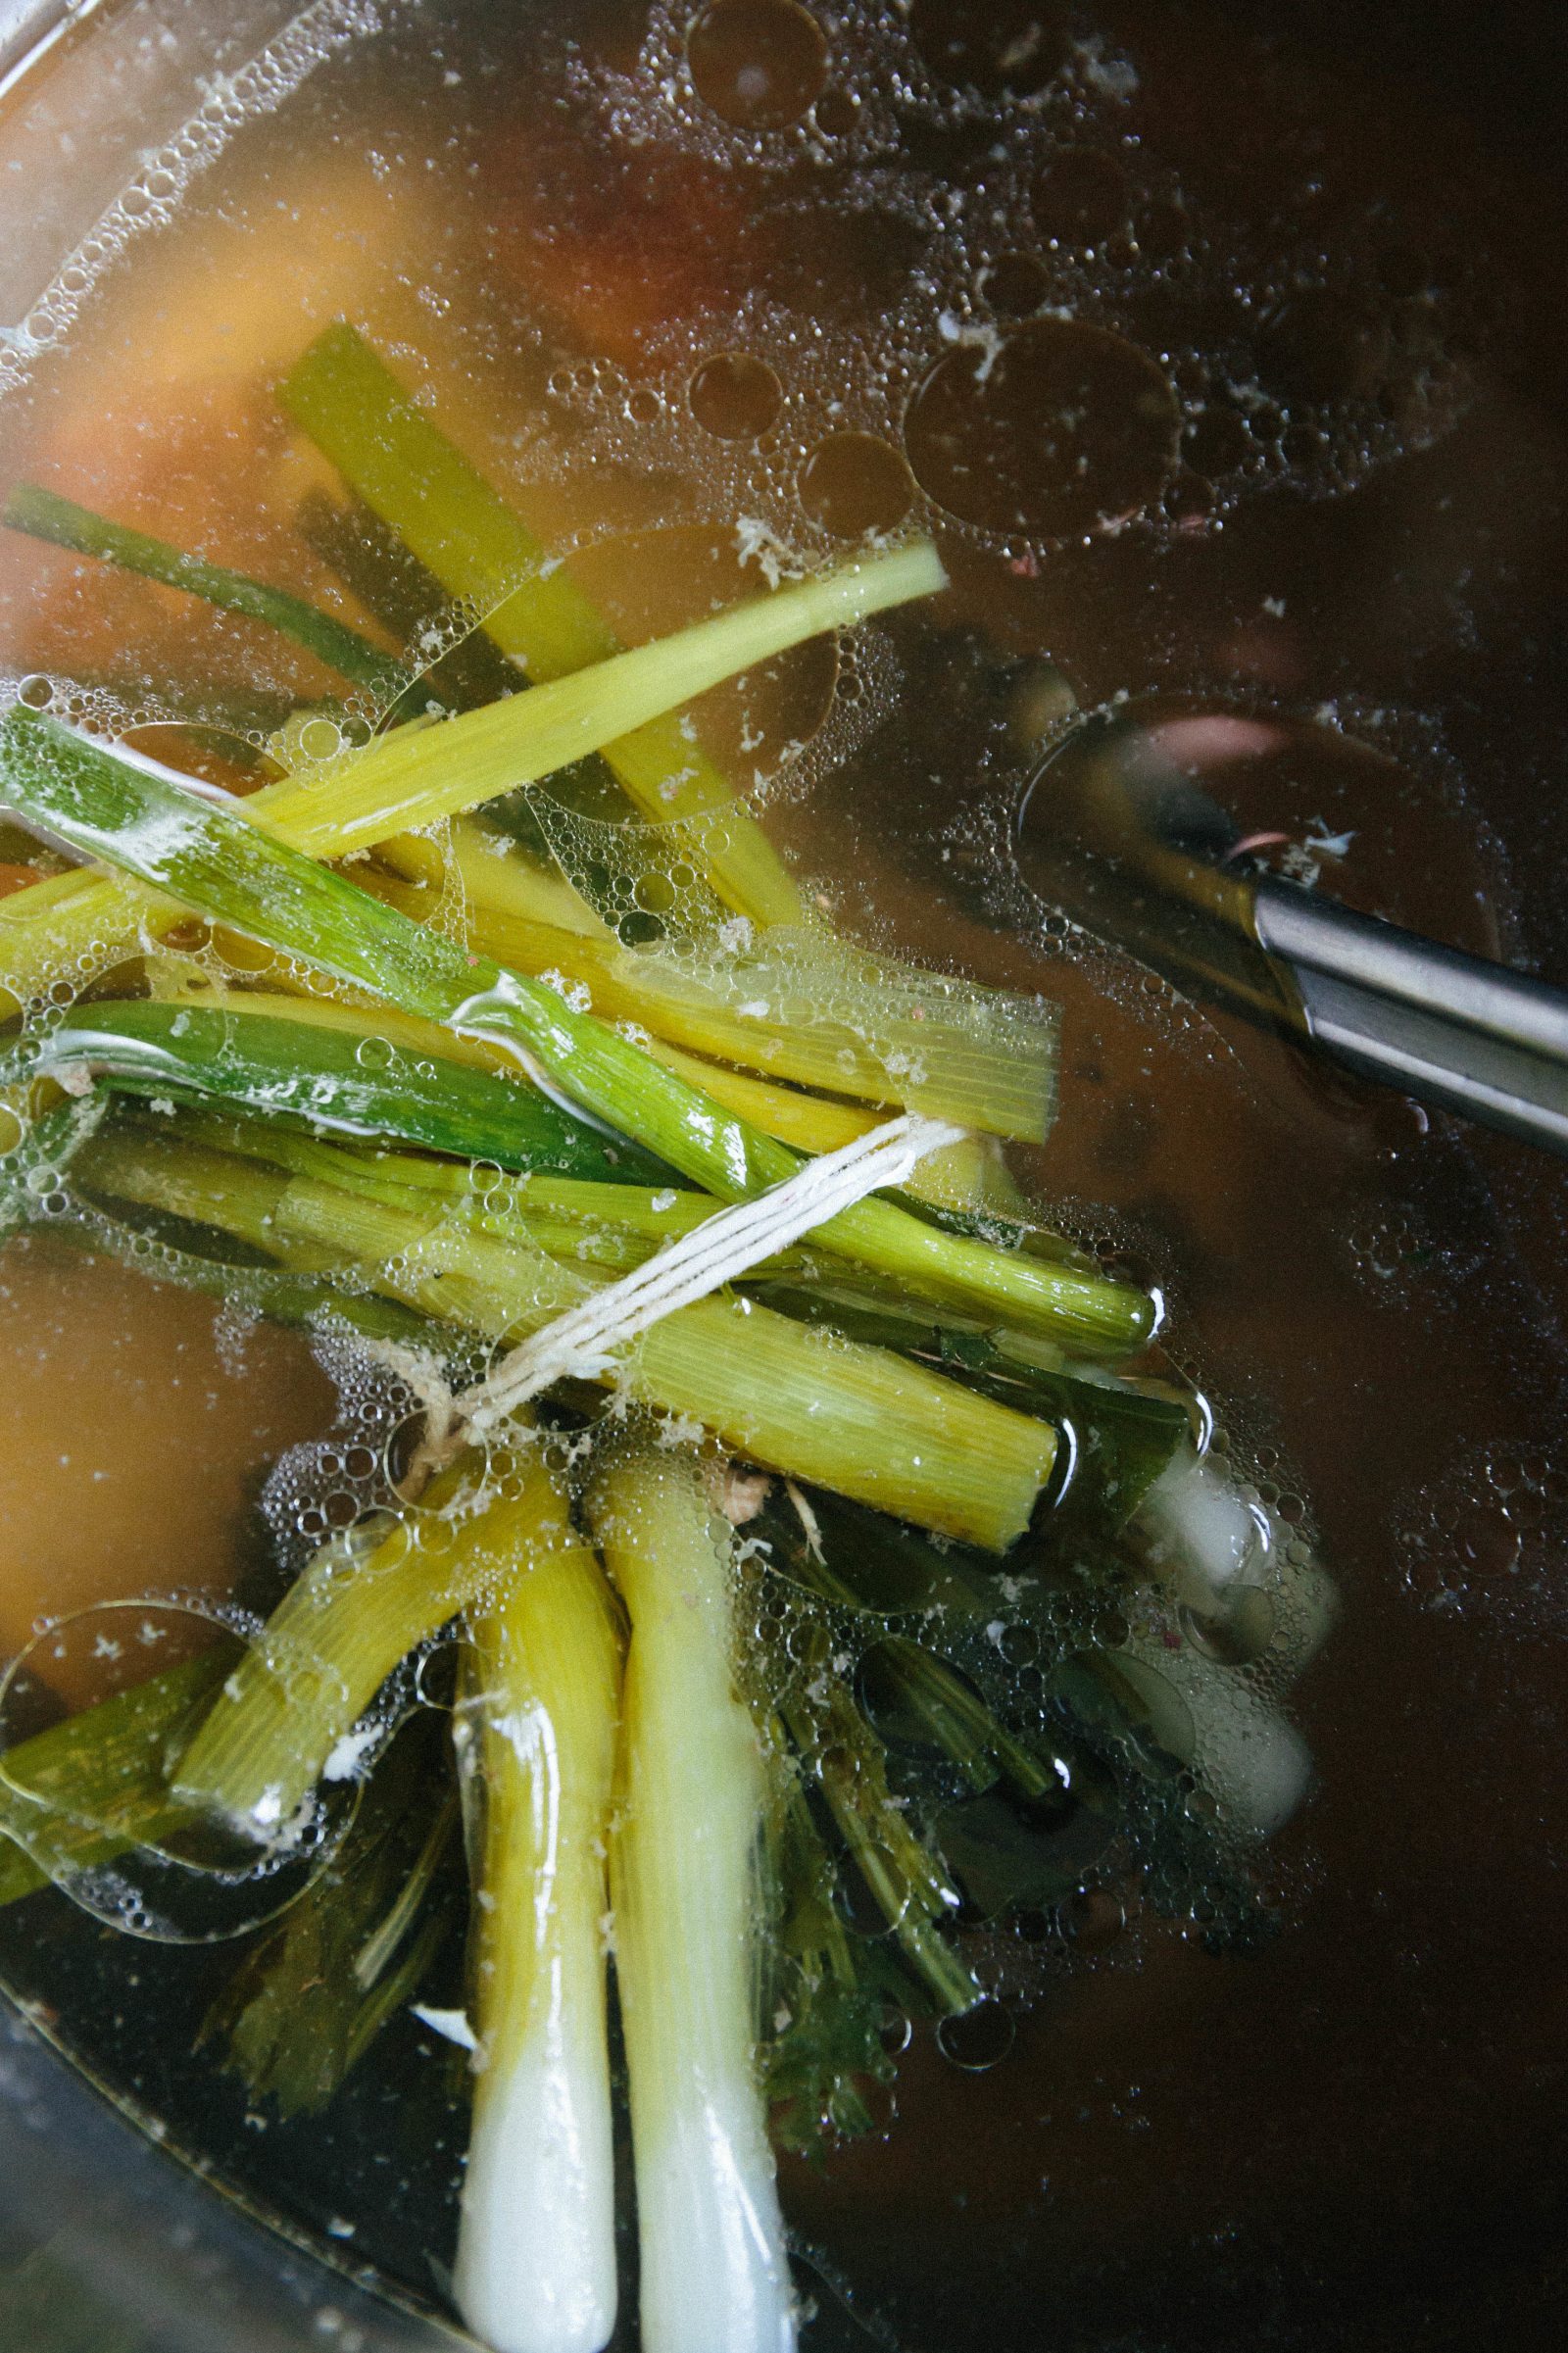 Prepare the herbs and make the broth